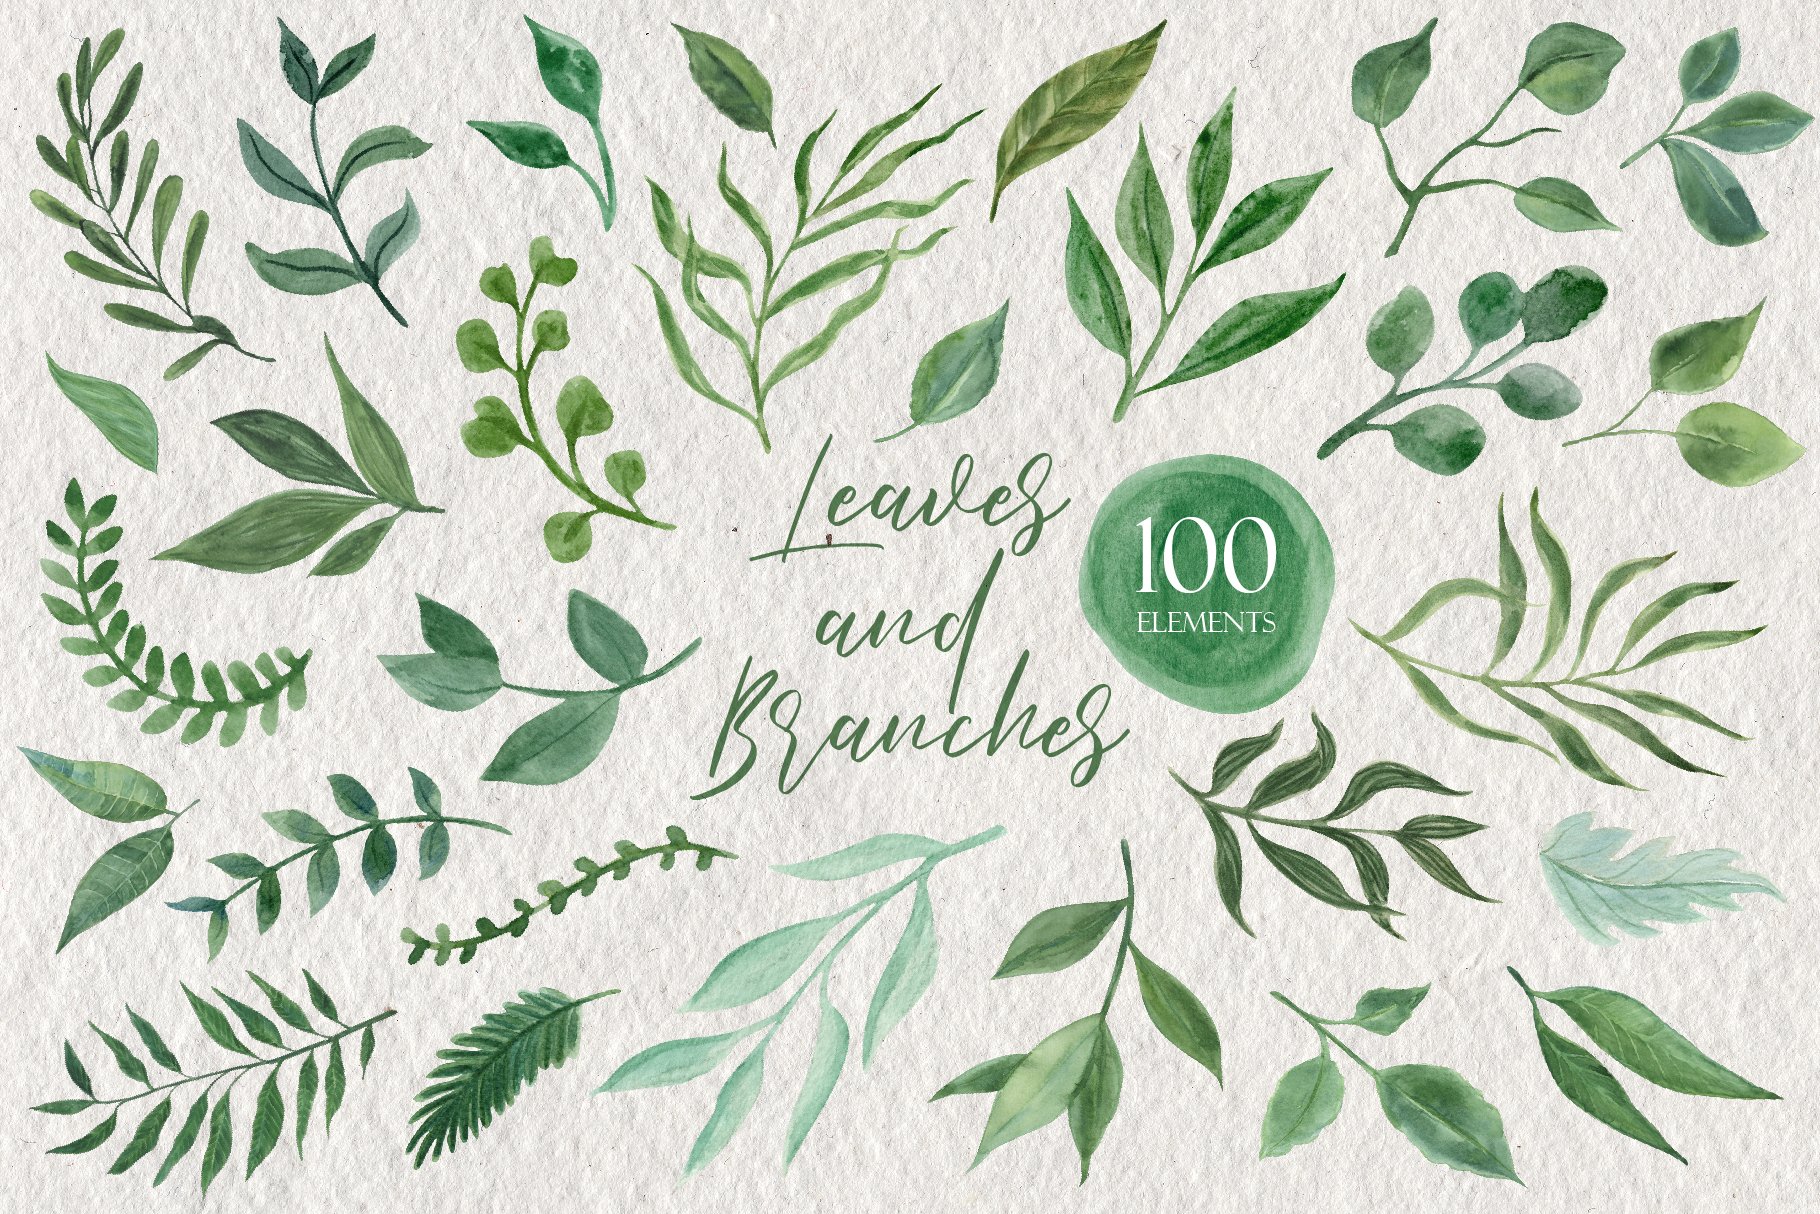 Leaves and Branches cover image.